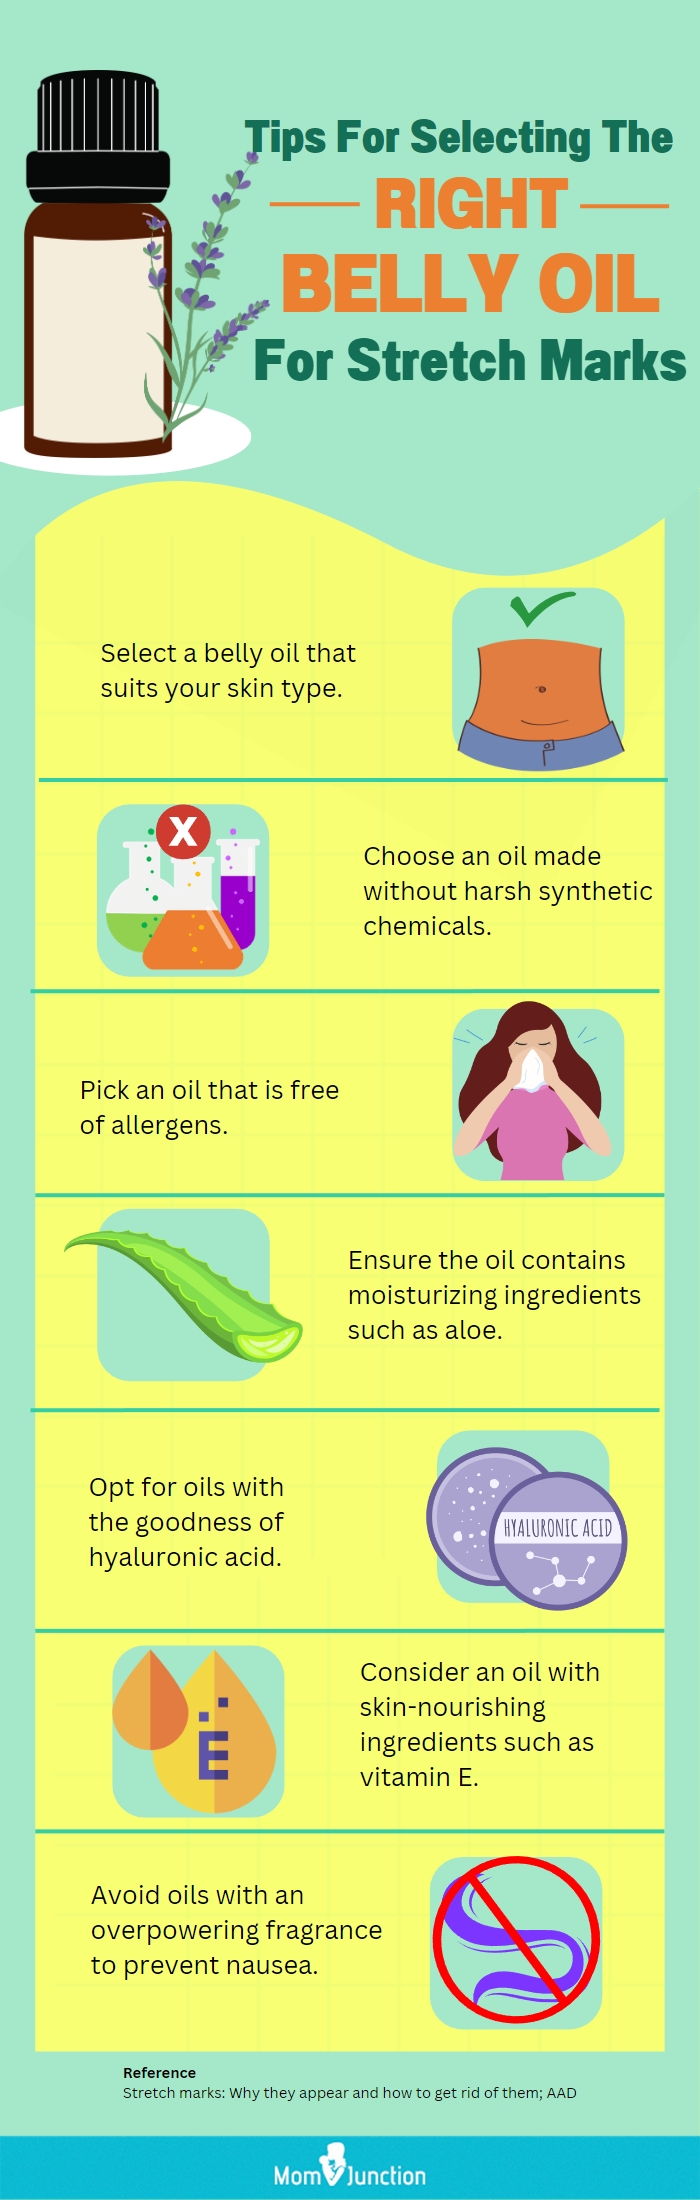 Tips For Selecting The Right Belly Oil For Stretch Marks (infographic)